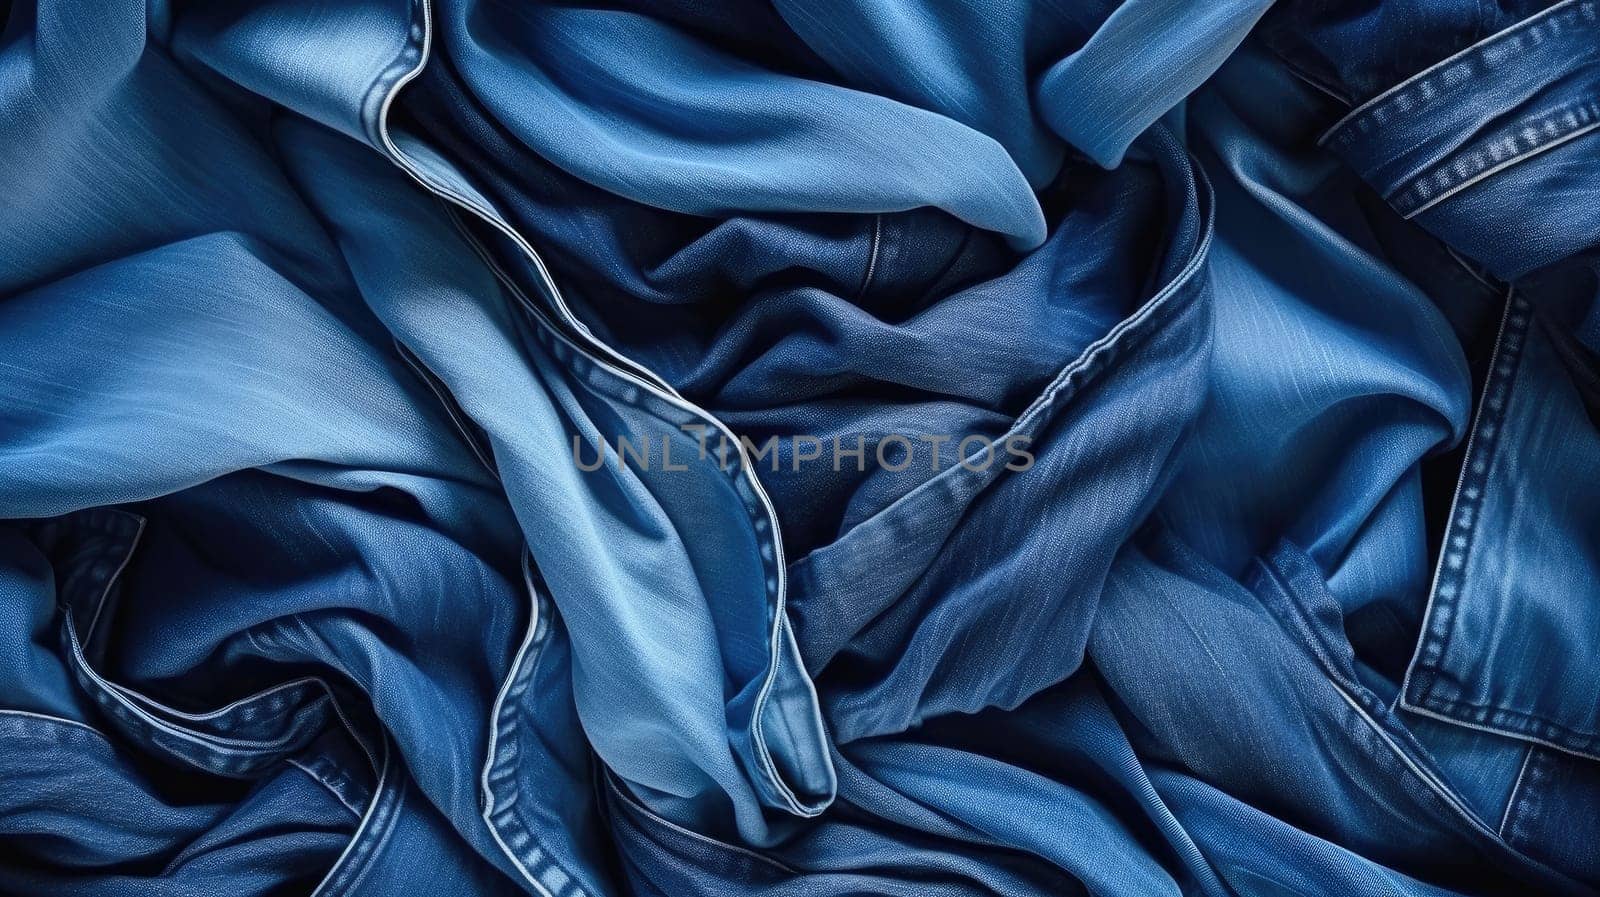 Denim background. Variety of crumpled blue jeans. Top view to stack of jeans denim. Top View Stack of Crumpled Blue Jeans, Assorted Denim Background Clothing Variety and Textured Folded Denim Display